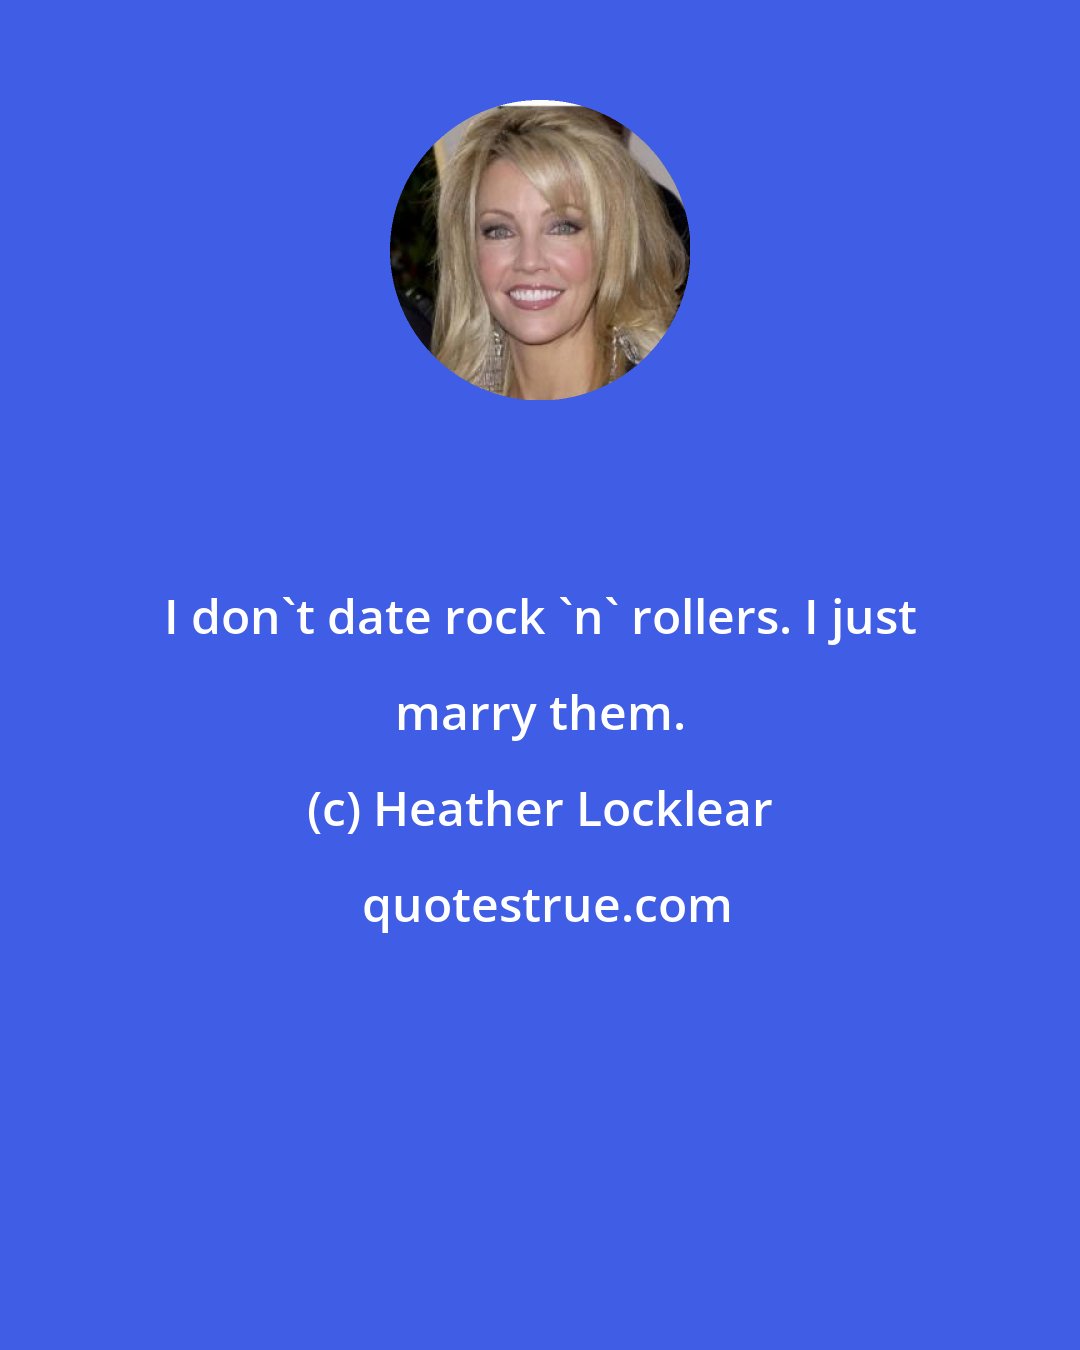 Heather Locklear: I don't date rock 'n' rollers. I just marry them.